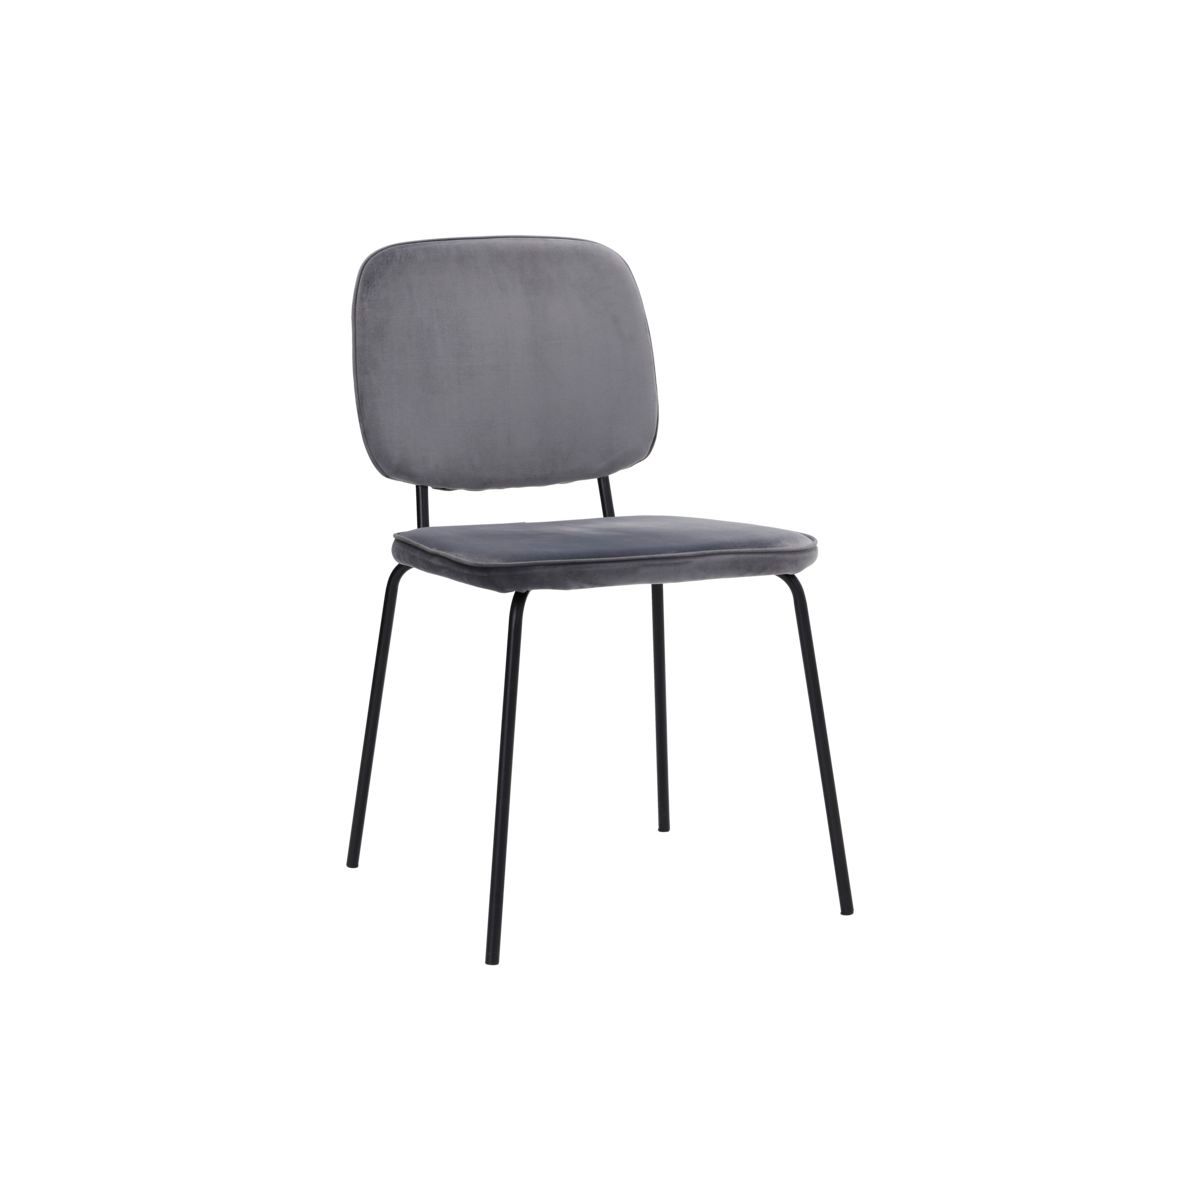 House Doctor Chair, Comma, Grey, Seat height: 46 cm